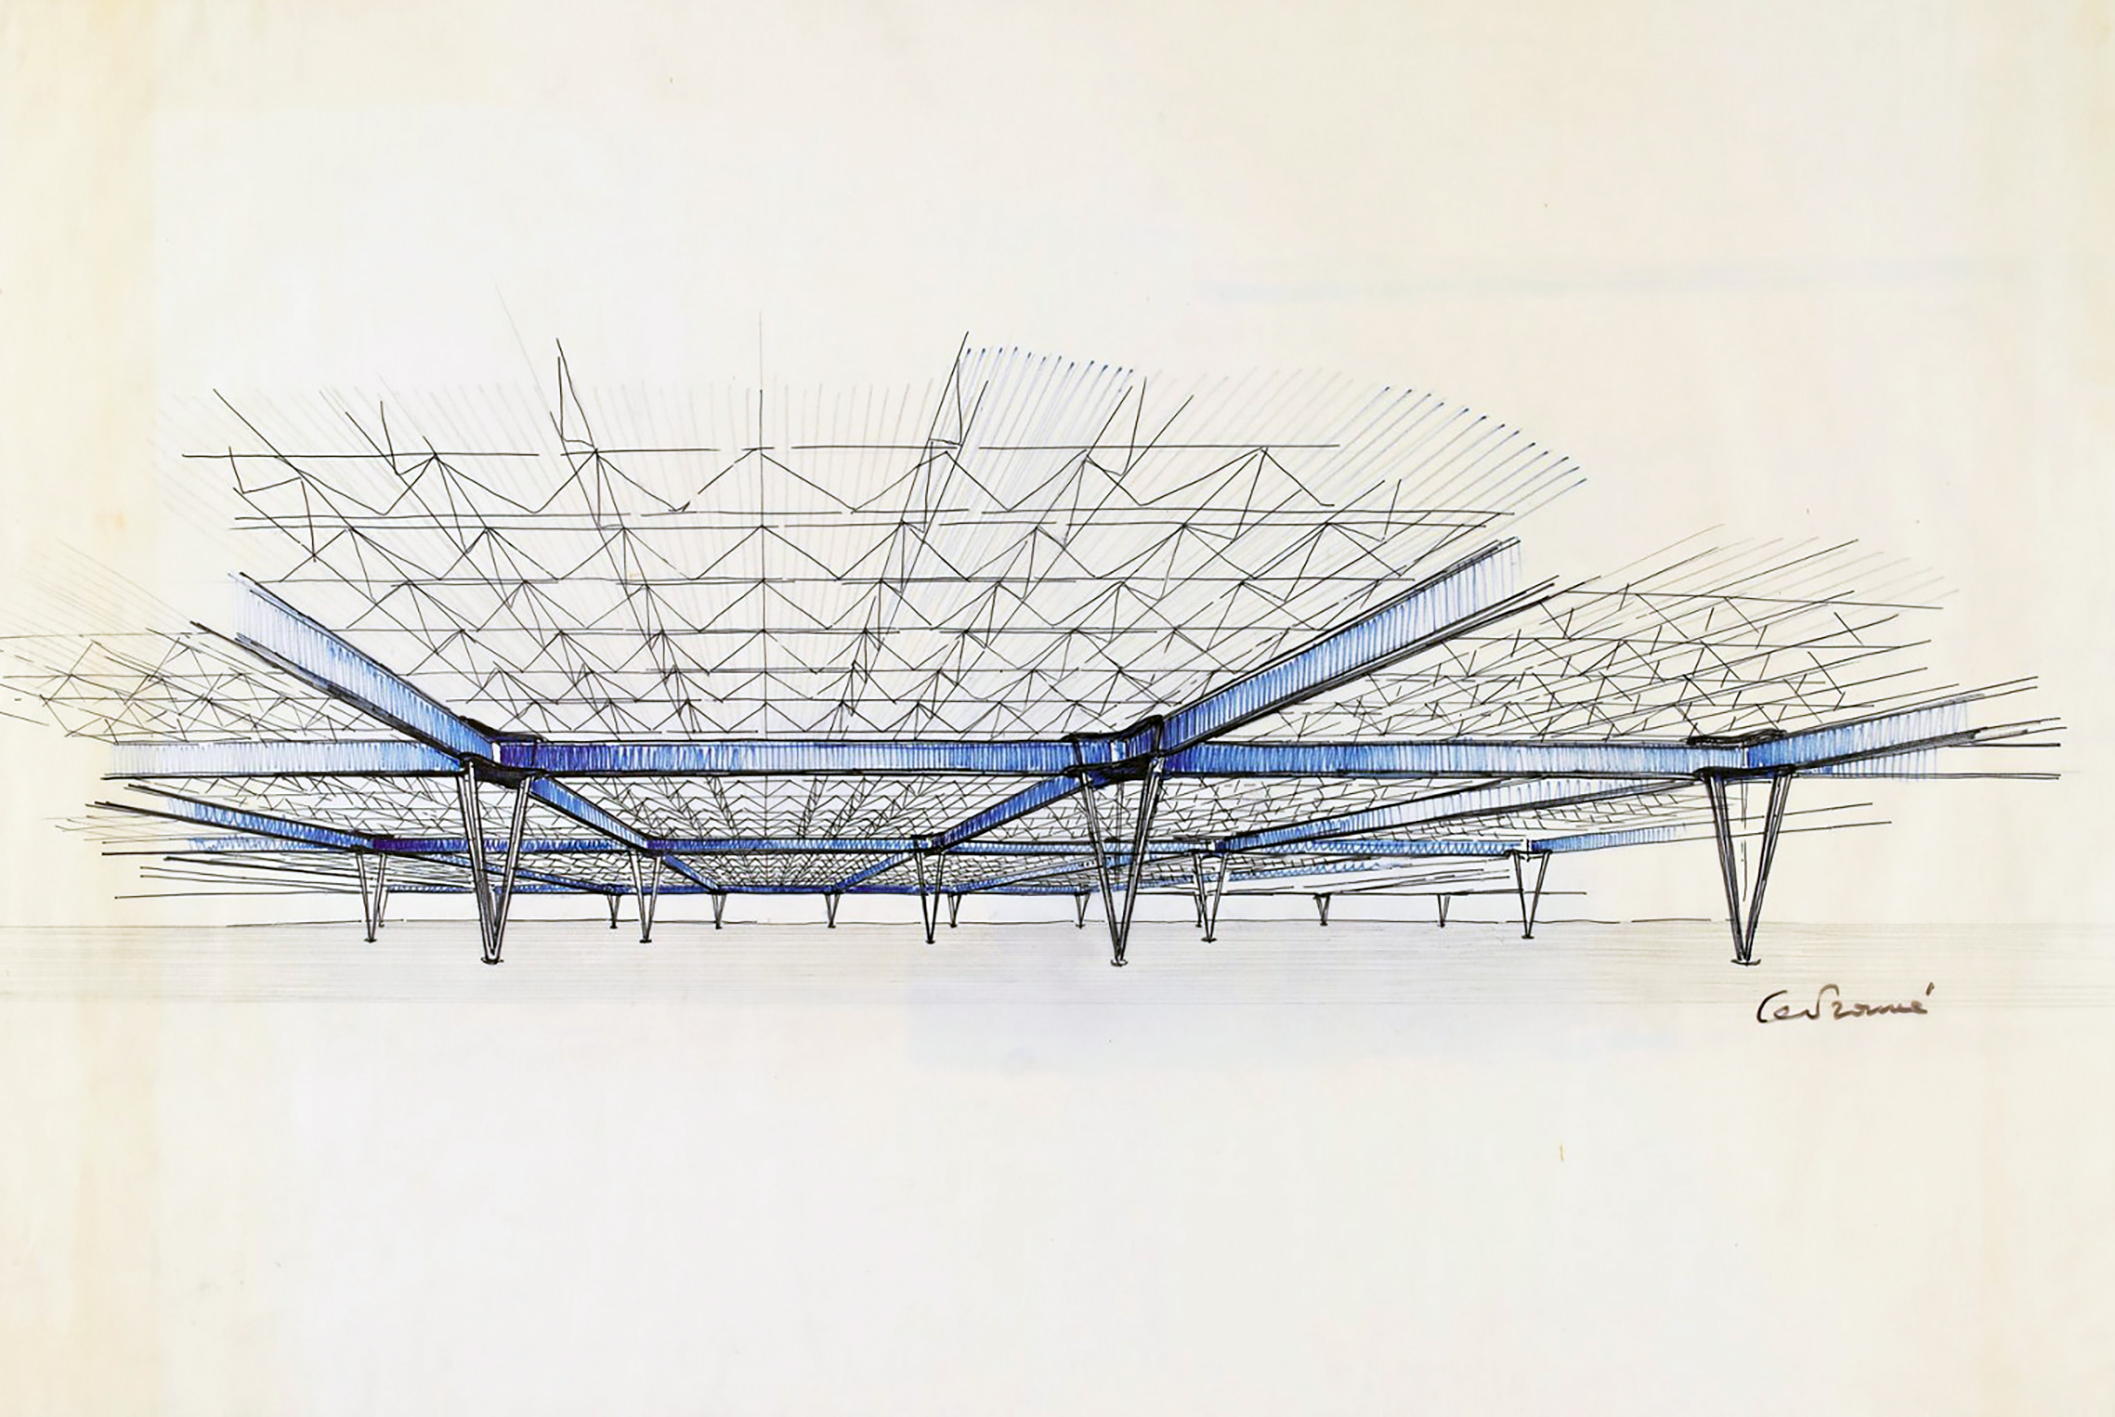 Alpexpo, trade fair center, Grenoble, 1967–1970 (Jean Prouvé, with architect C. Prouvé, engineer L. Pétroff). The construction system in perspective.